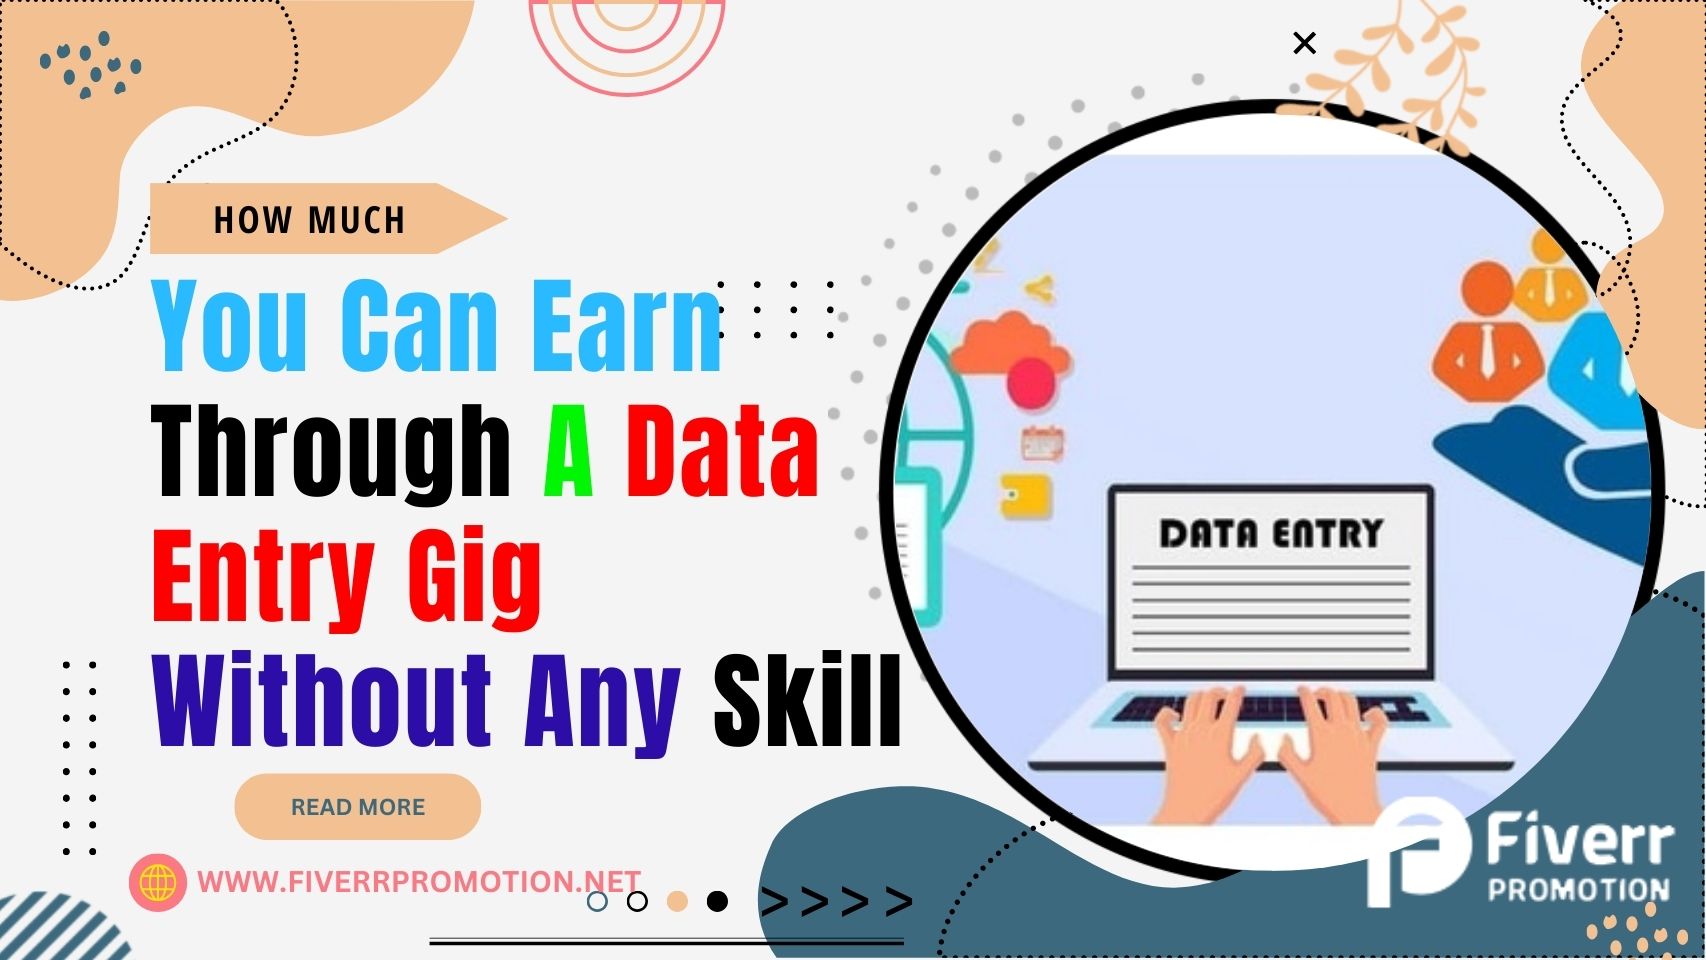 How much you can earn through a data entry gig without any skill